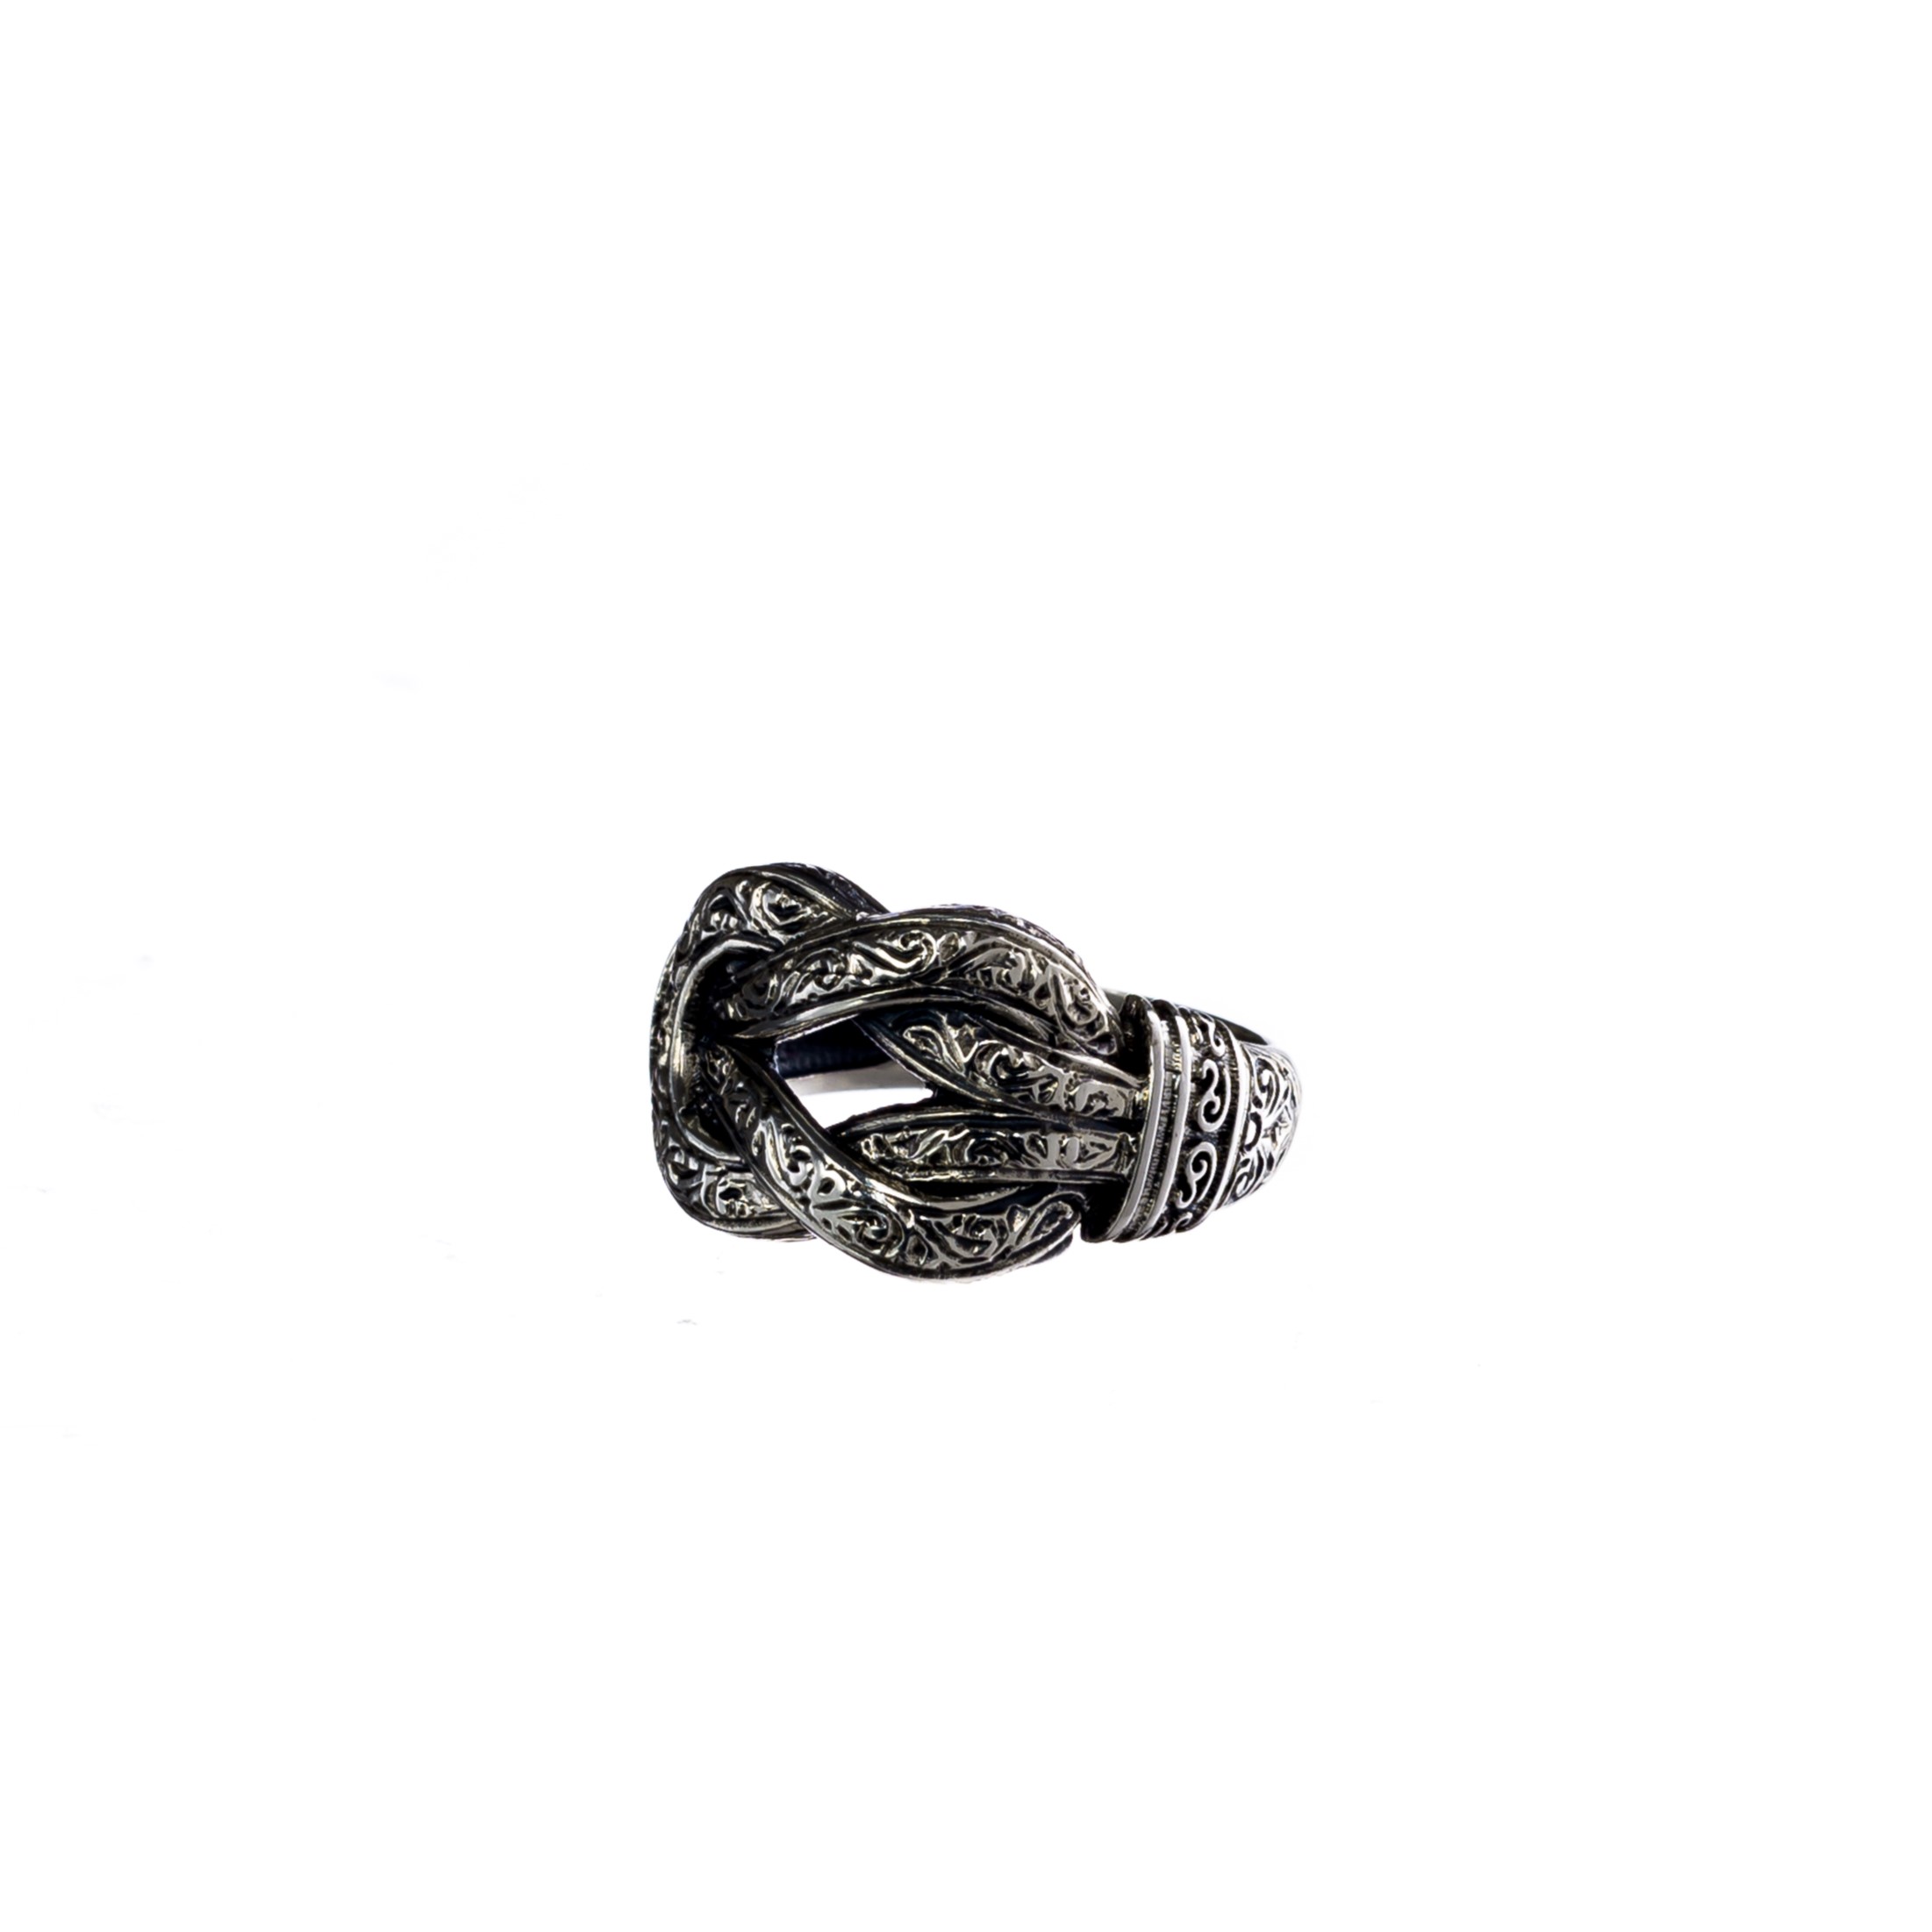 The knot ring in sterling silver